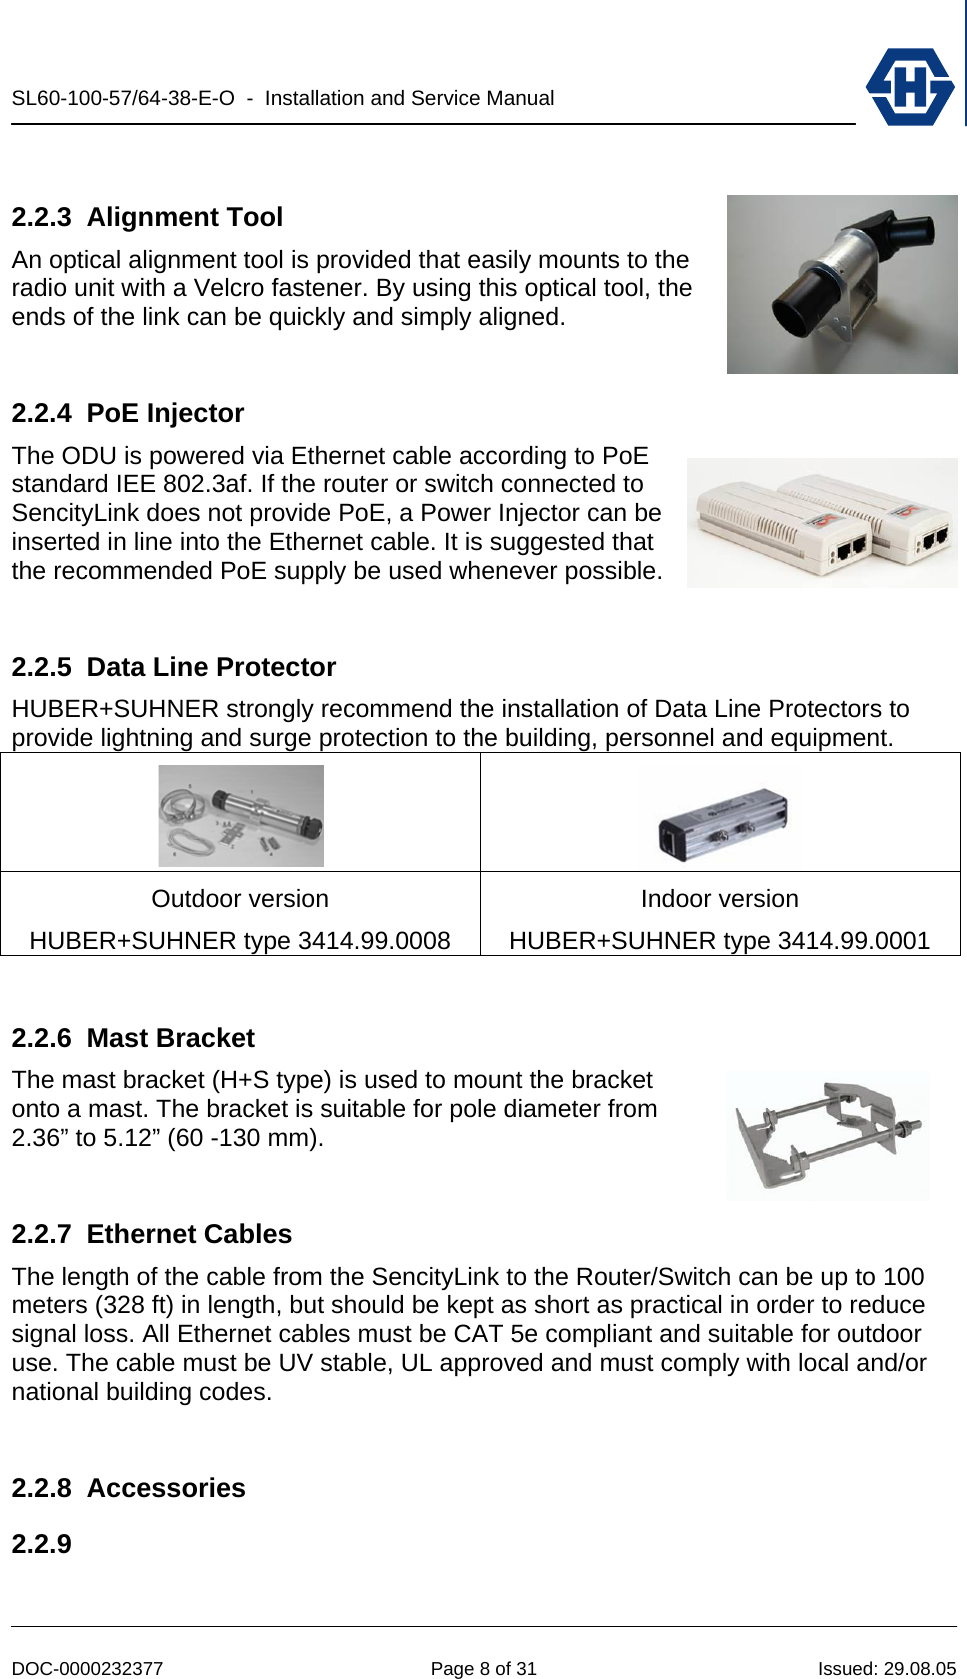 SL60-100-57/64-38-E-O  -  Installation and Service Manual   DOC-0000232377  Page 8 of 31  Issued: 29.08.05  2.2.3 Alignment Tool An optical alignment tool is provided that easily mounts to the radio unit with a Velcro fastener. By using this optical tool, the ends of the link can be quickly and simply aligned.  2.2.4 PoE Injector The ODU is powered via Ethernet cable according to PoE standard IEE 802.3af. If the router or switch connected to SencityLink does not provide PoE, a Power Injector can be inserted in line into the Ethernet cable. It is suggested that the recommended PoE supply be used whenever possible.  2.2.5 Data Line Protector HUBER+SUHNER strongly recommend the installation of Data Line Protectors to provide lightning and surge protection to the building, personnel and equipment.   Outdoor version HUBER+SUHNER type 3414.99.0008 Indoor version HUBER+SUHNER type 3414.99.0001  2.2.6 Mast Bracket The mast bracket (H+S type) is used to mount the bracket onto a mast. The bracket is suitable for pole diameter from 2.36” to 5.12” (60 -130 mm).  2.2.7 Ethernet Cables The length of the cable from the SencityLink to the Router/Switch can be up to 100 meters (328 ft) in length, but should be kept as short as practical in order to reduce signal loss. All Ethernet cables must be CAT 5e compliant and suitable for outdoor use. The cable must be UV stable, UL approved and must comply with local and/or national building codes.  2.2.8 Accessories 2.2.9  